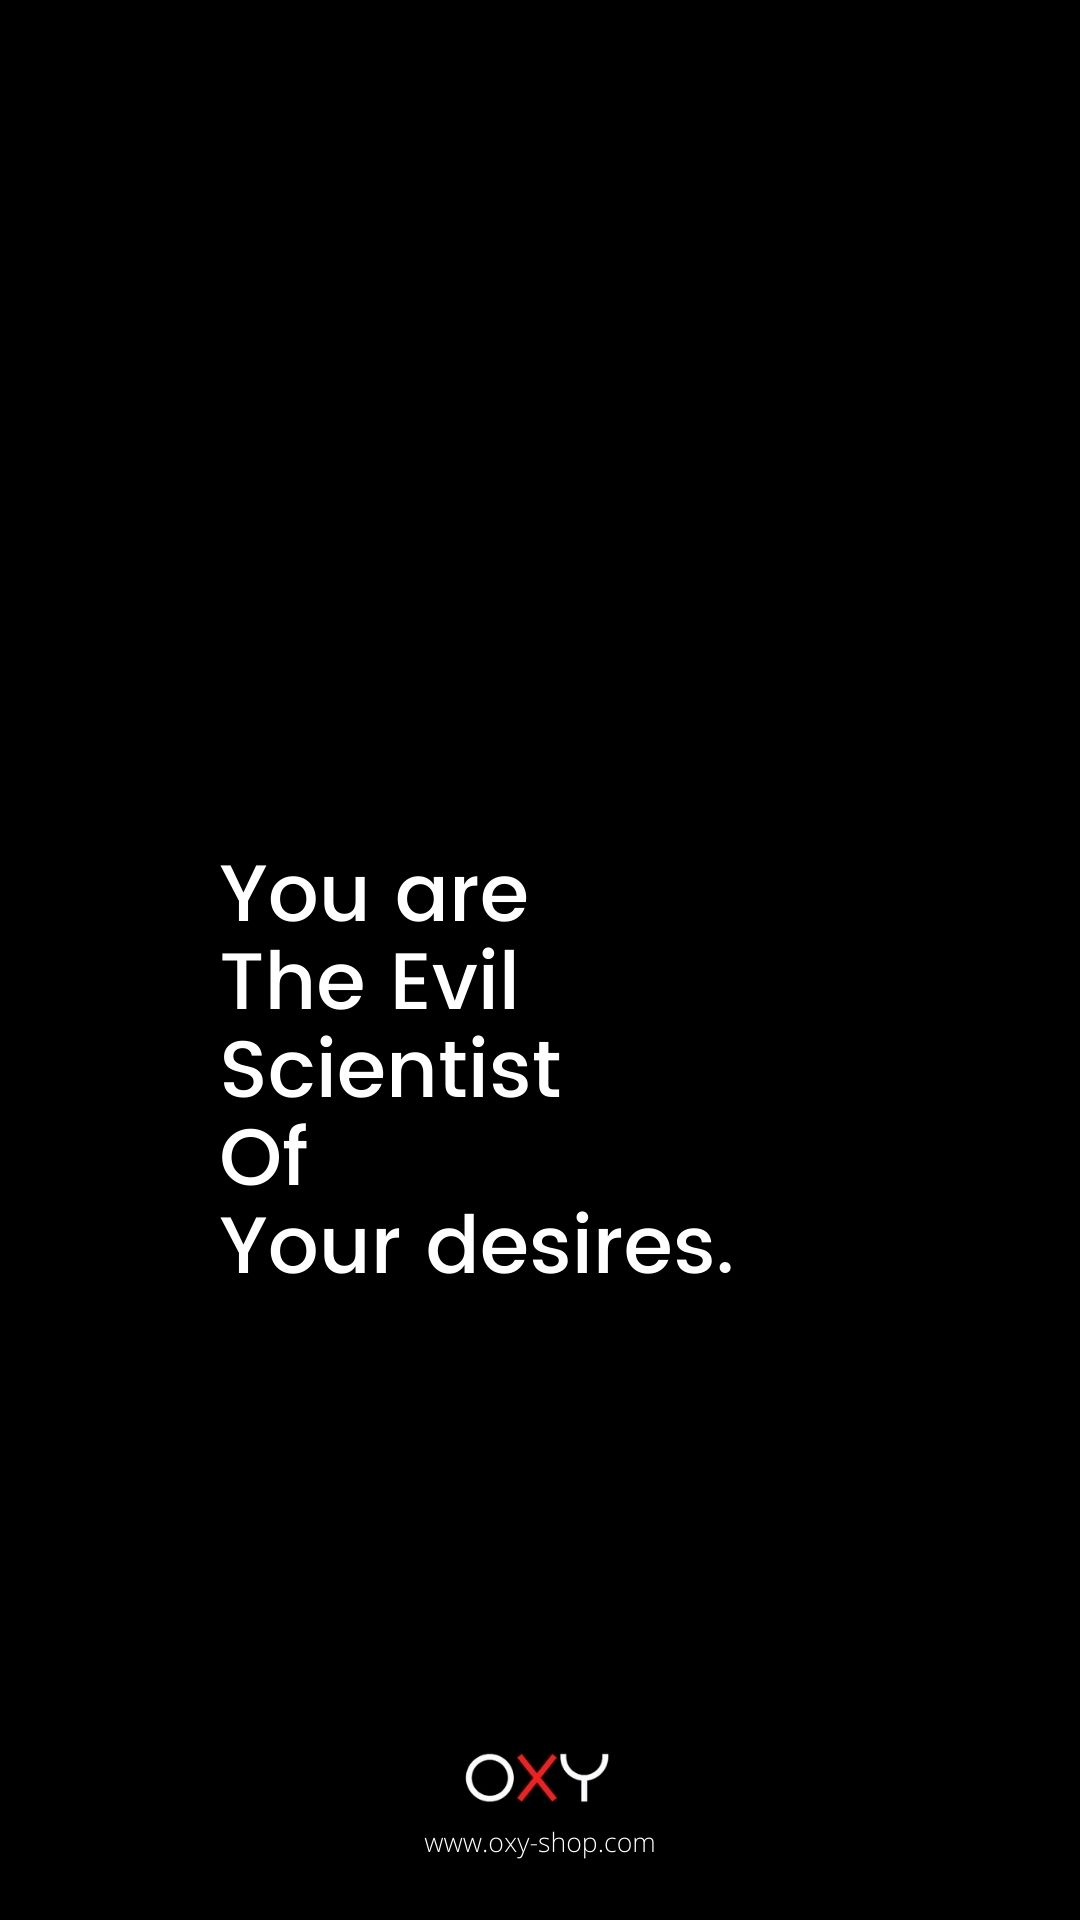 You are the evil scientist of your desires. - BDSM wallpaper